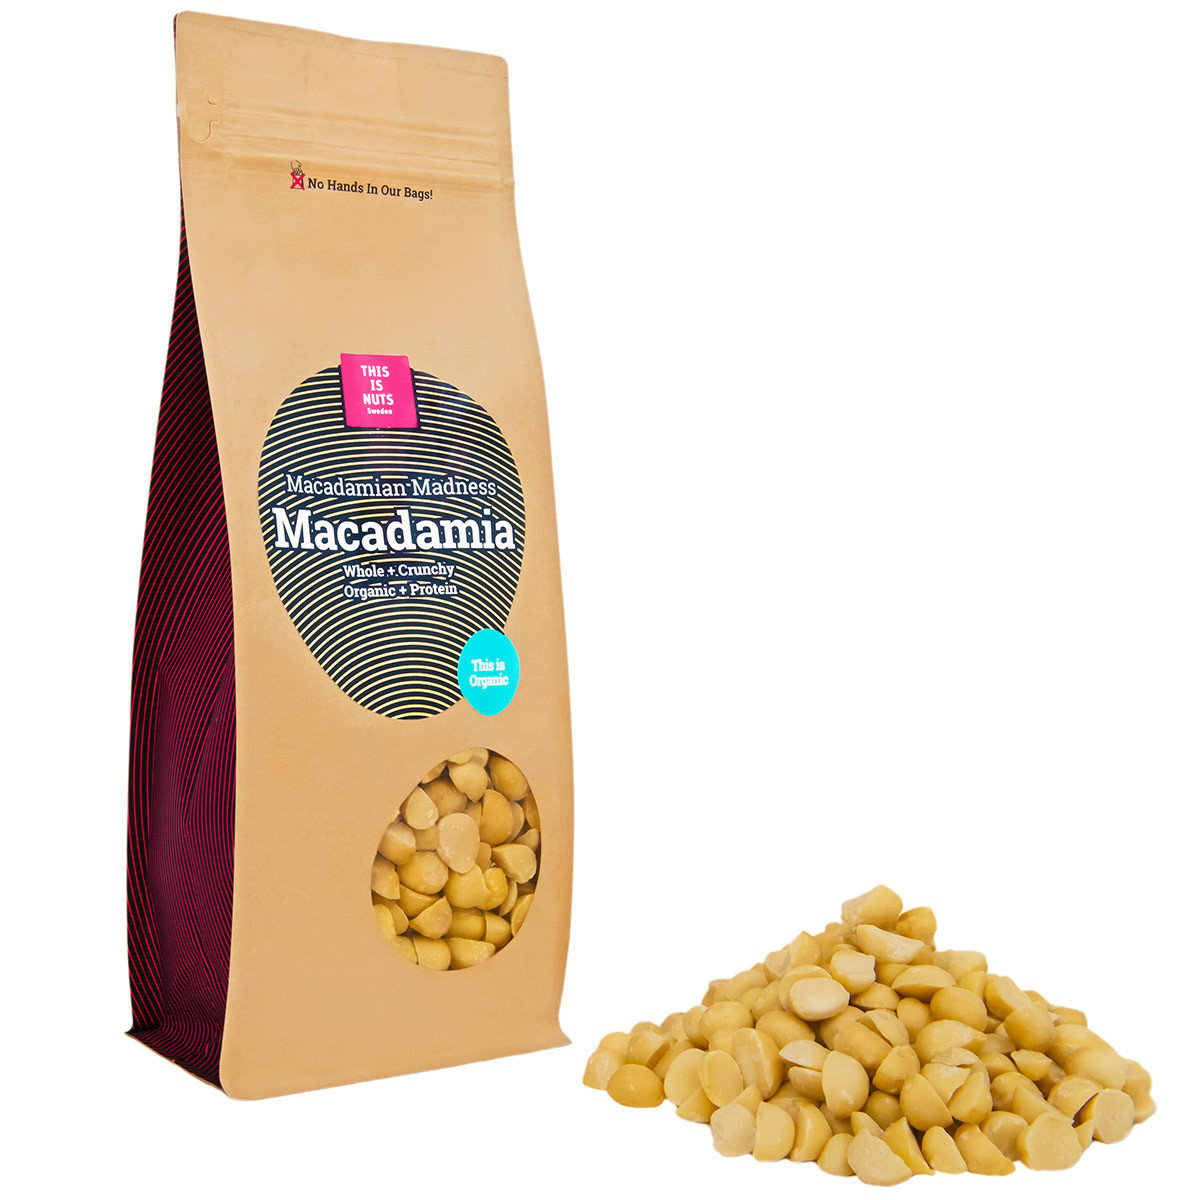 This is nuts Sweden Macadamian Madness Macadamia 150g